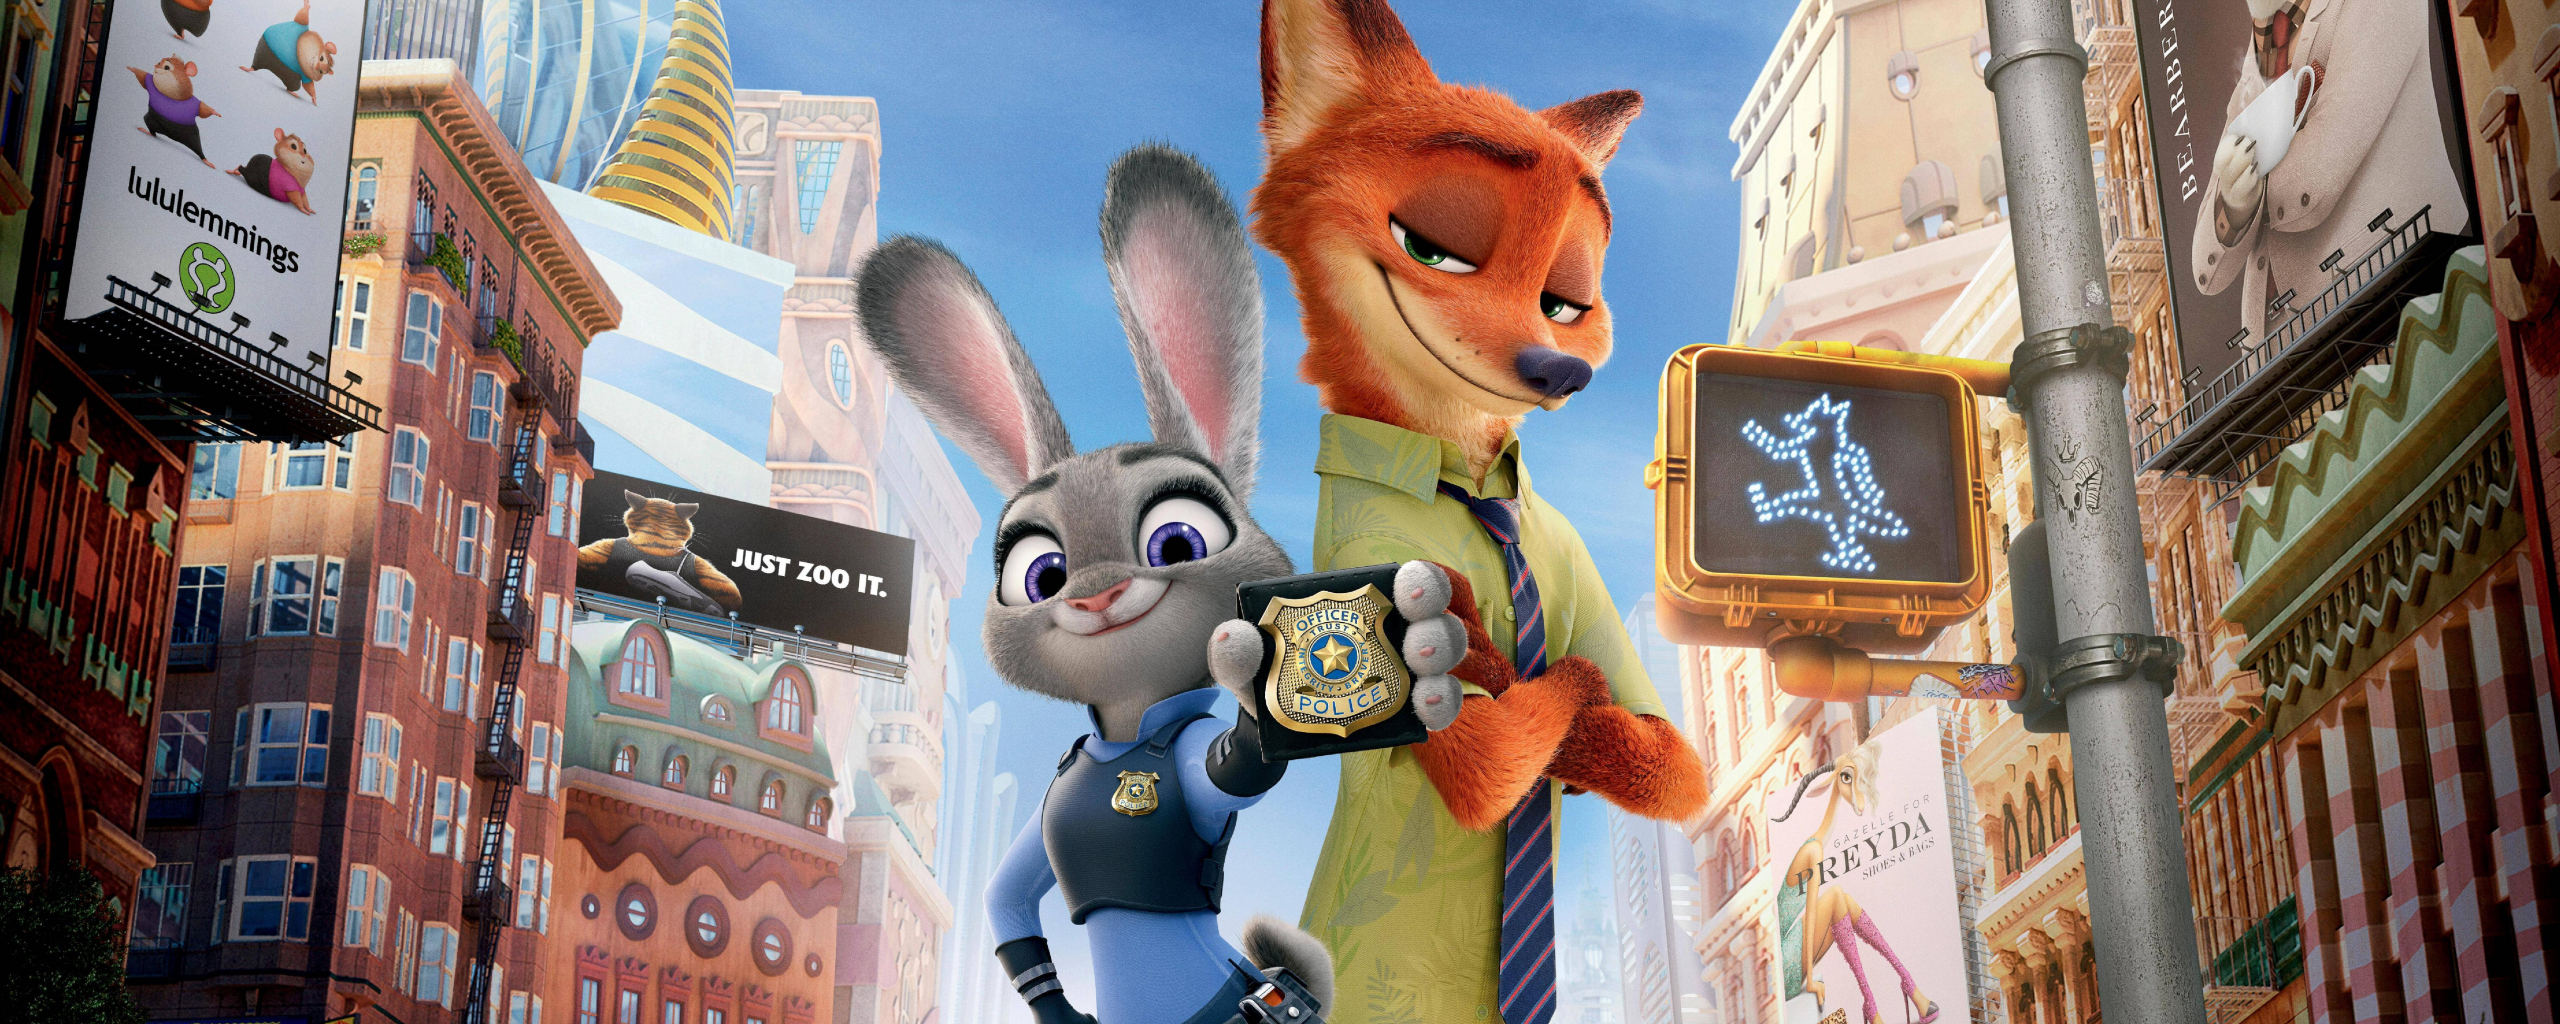 Desktop Wallpaper Zootopia Animated Movie, Judy Hopps And Nick Wallpaper, HD Image, Picture, Background, Reirl4